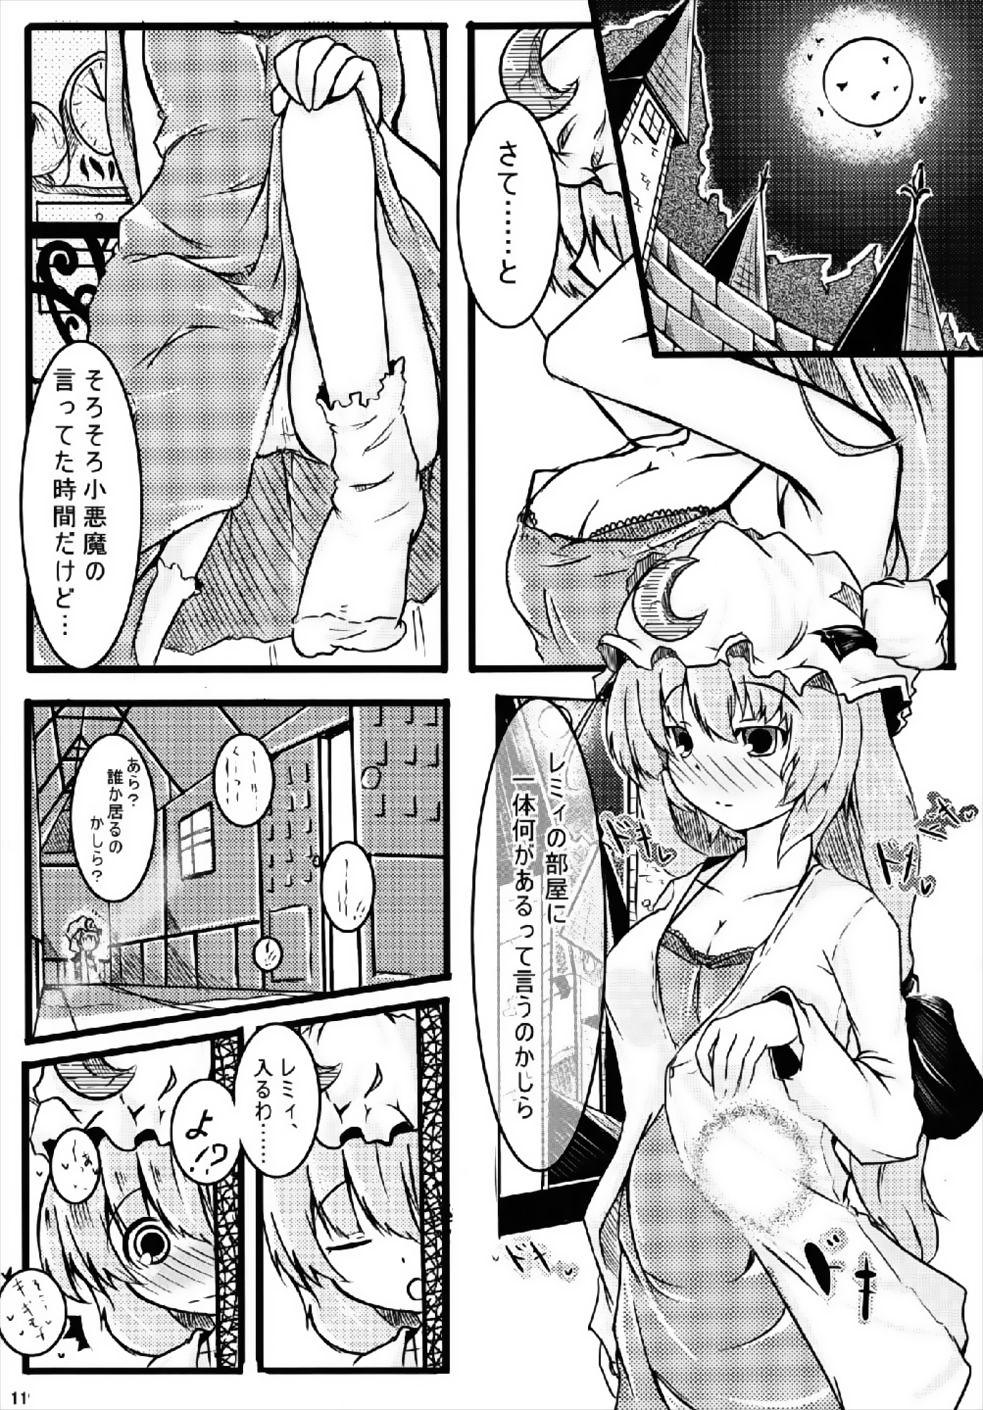 Ass Fetish RemiFlaPatche! - Touhou project Big Booty - Page 10